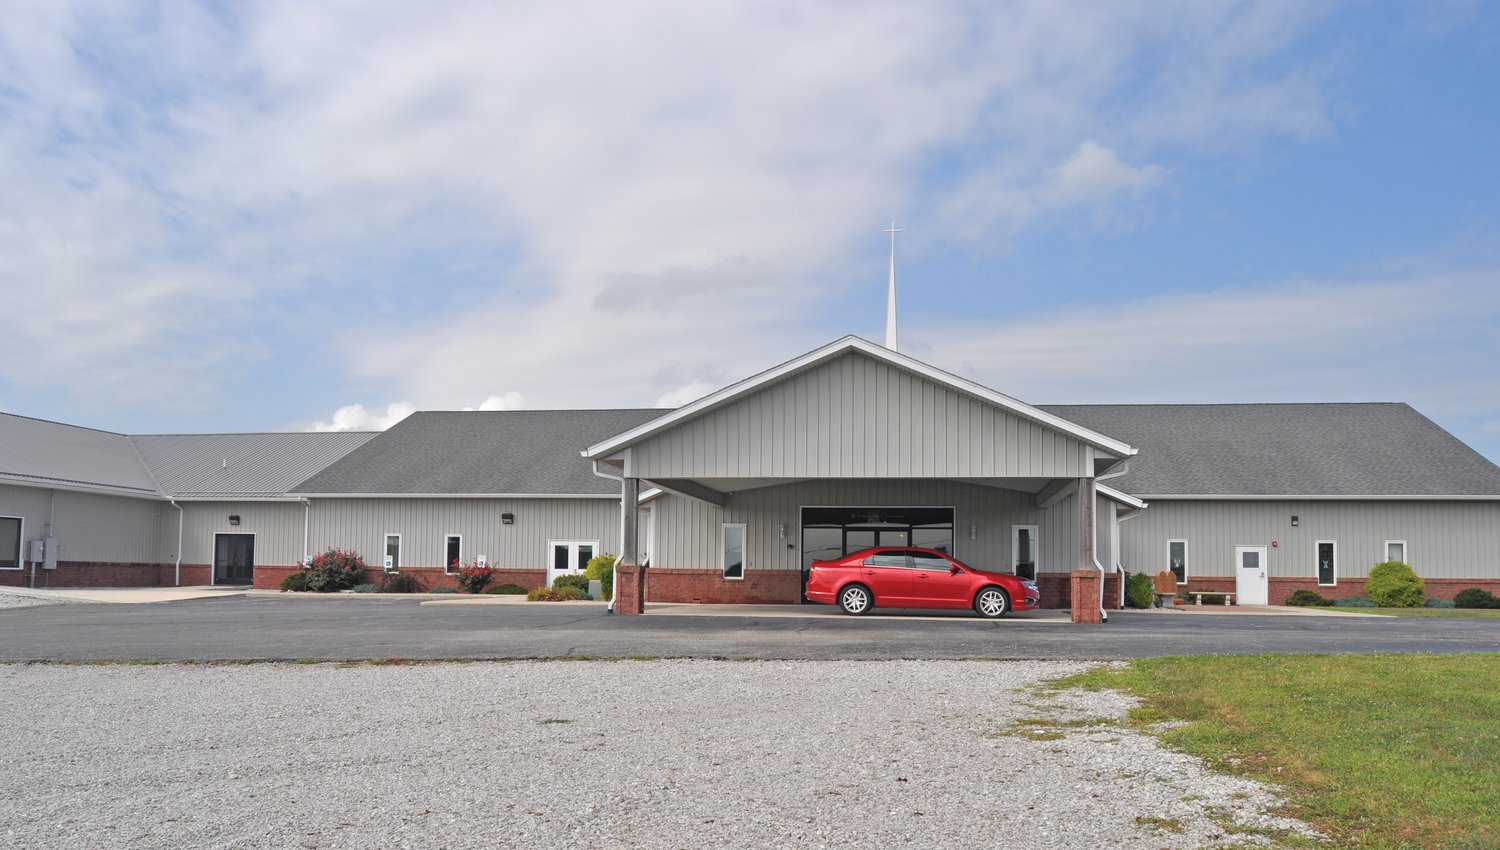 Whitesville Christian Church is shown last week. Ground was broken on the current facilities in 2008.